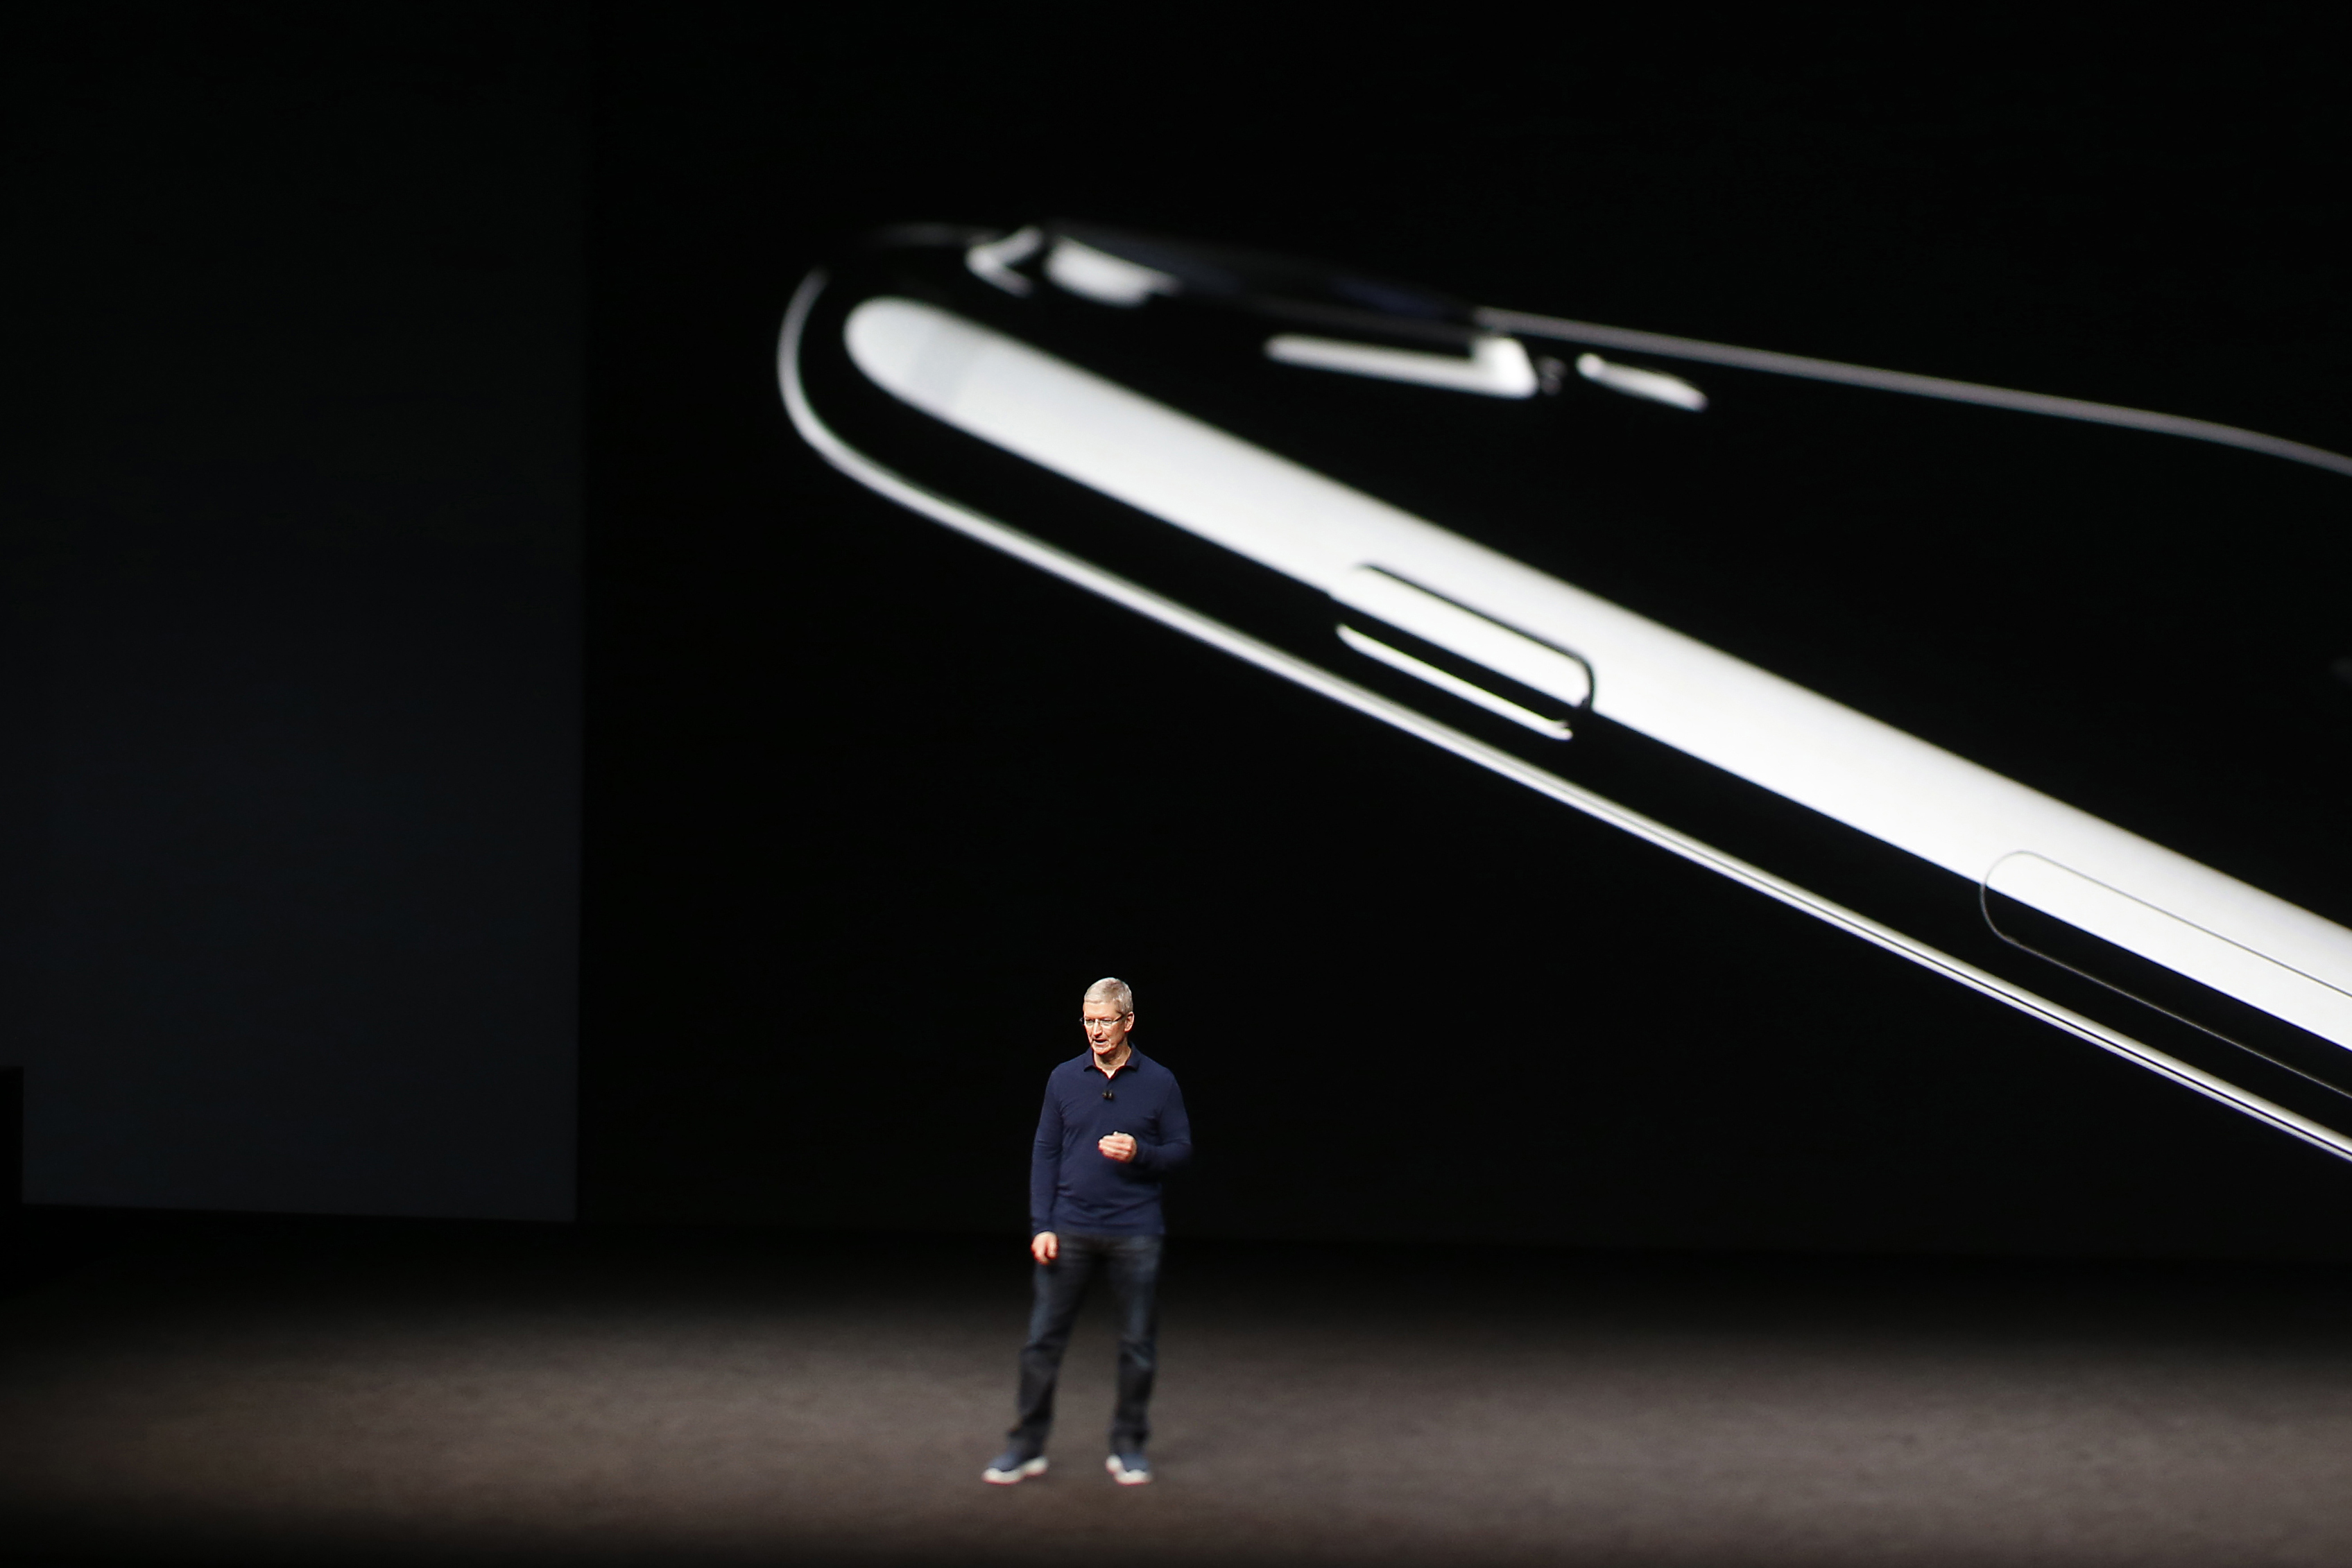 Apple CEO Tim Cook speaks on stage during a launch event on September 7, 2016 in San Francisco, California. (Stephen Lam&mdash;Getty Images)